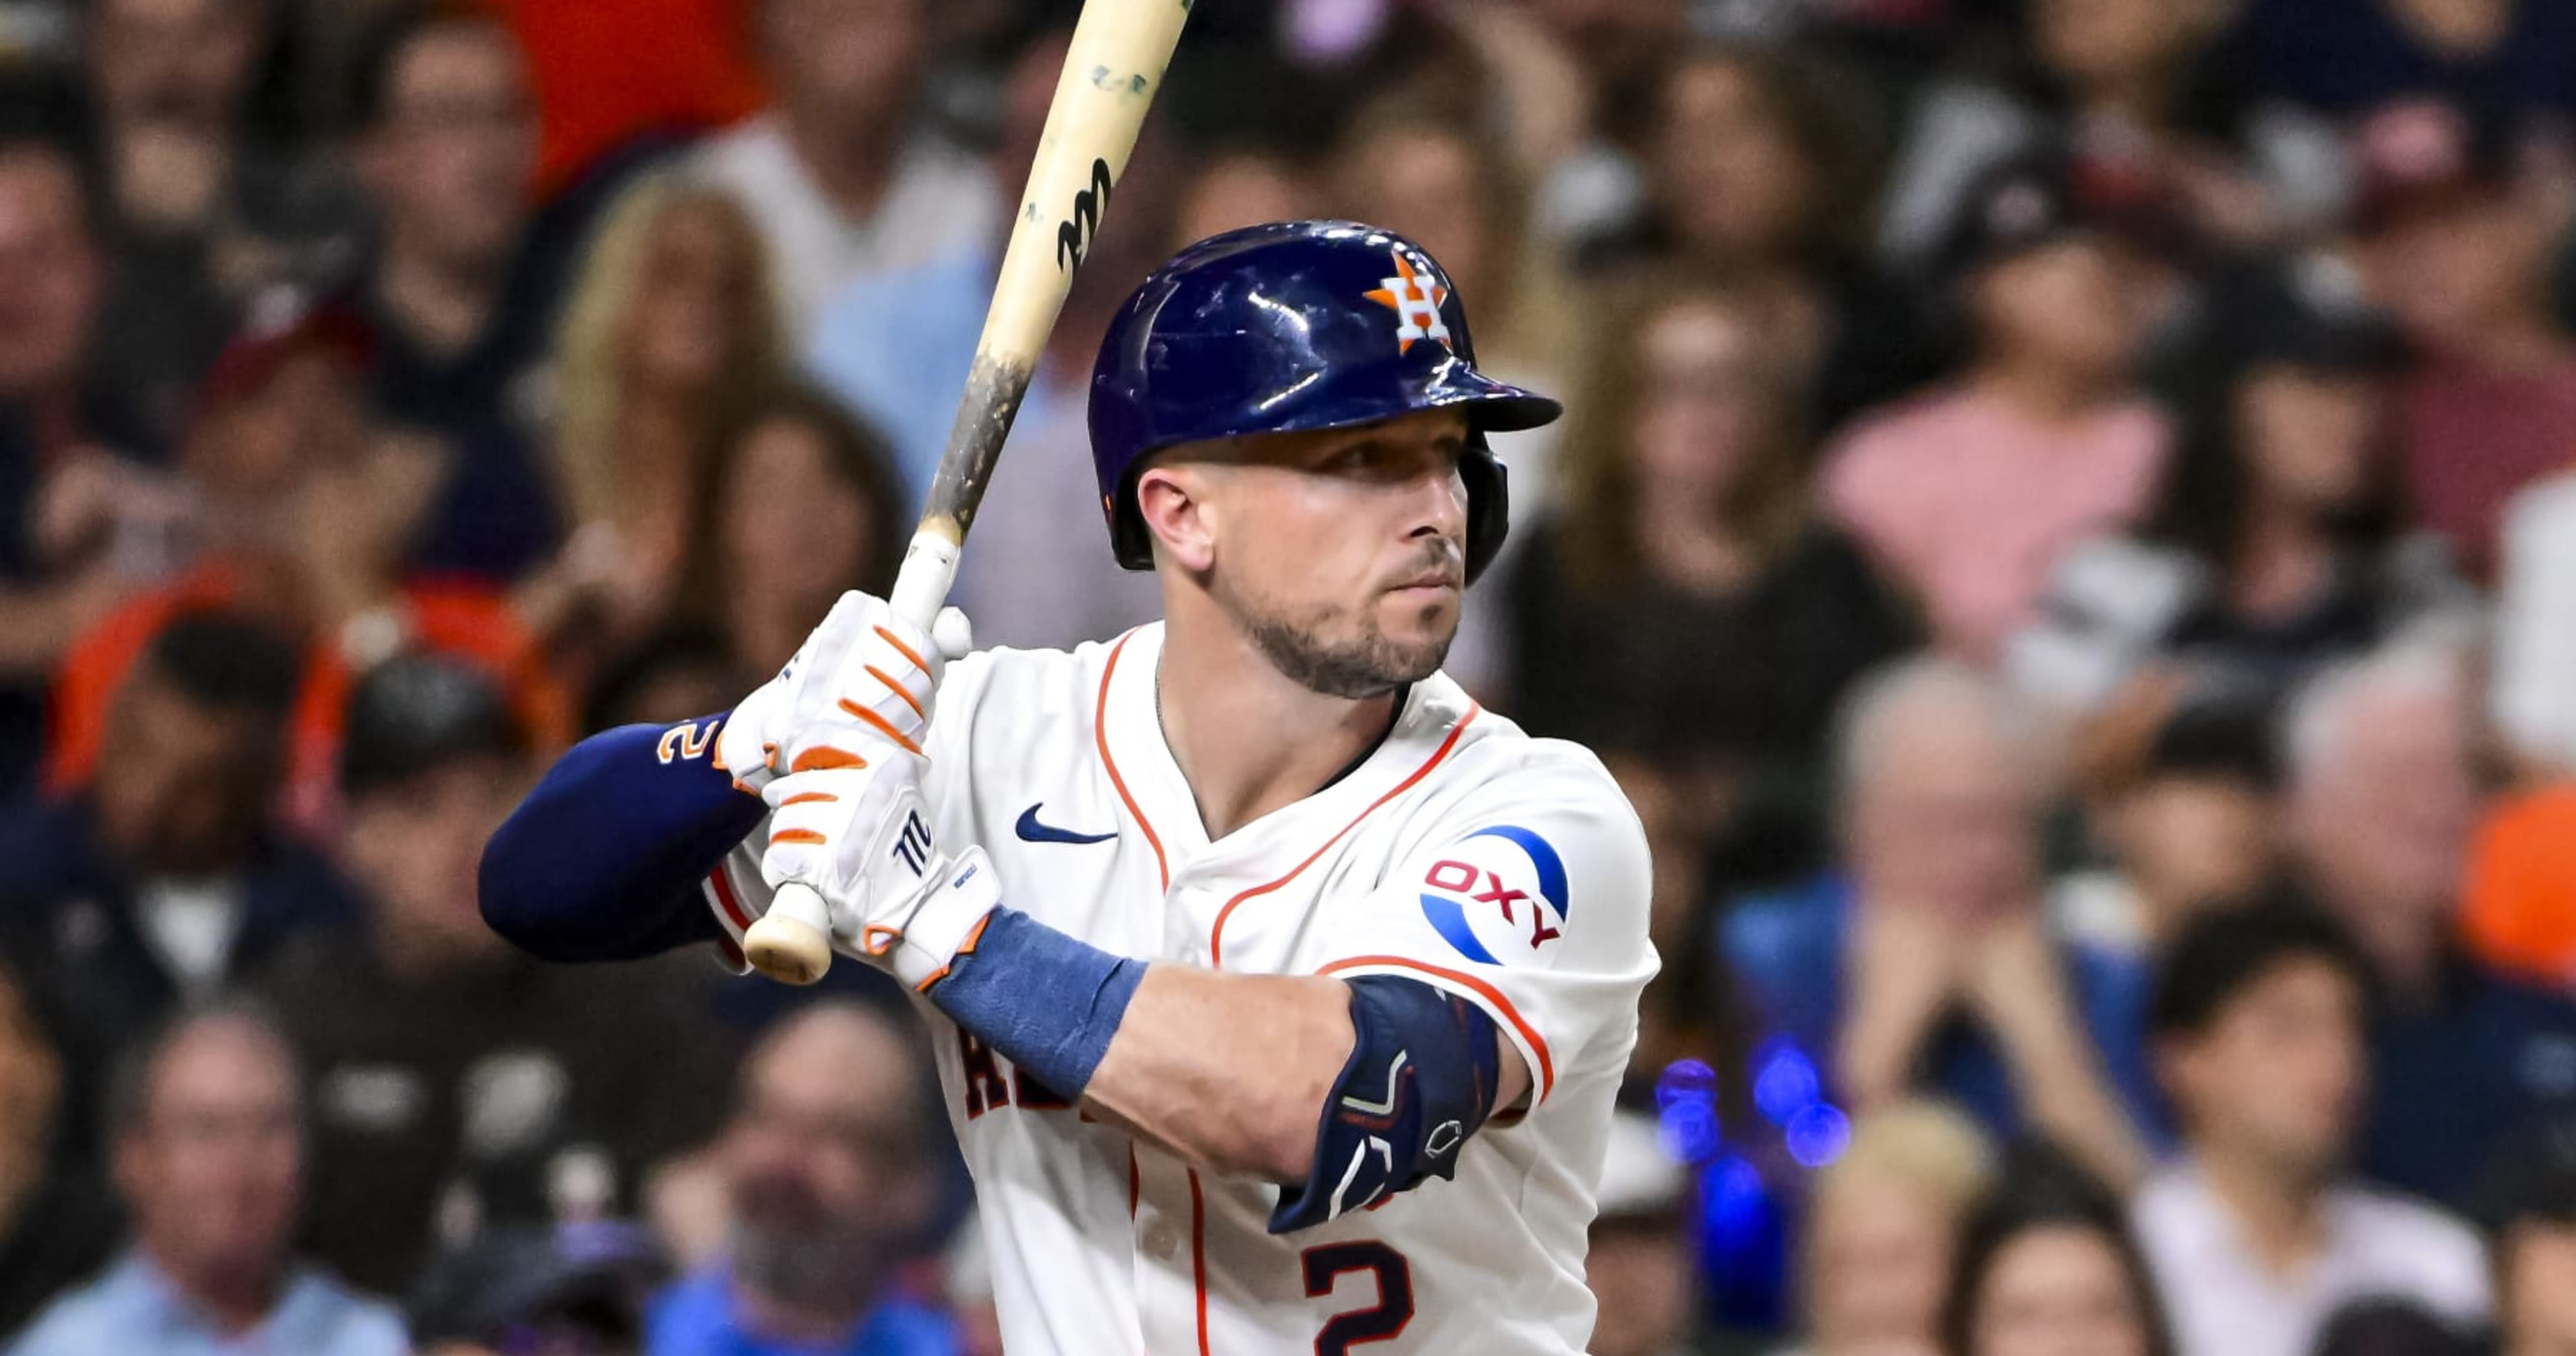 Alex Bregman, Sonny Gray and 7 Potential Surprise MLB Trade Candidates